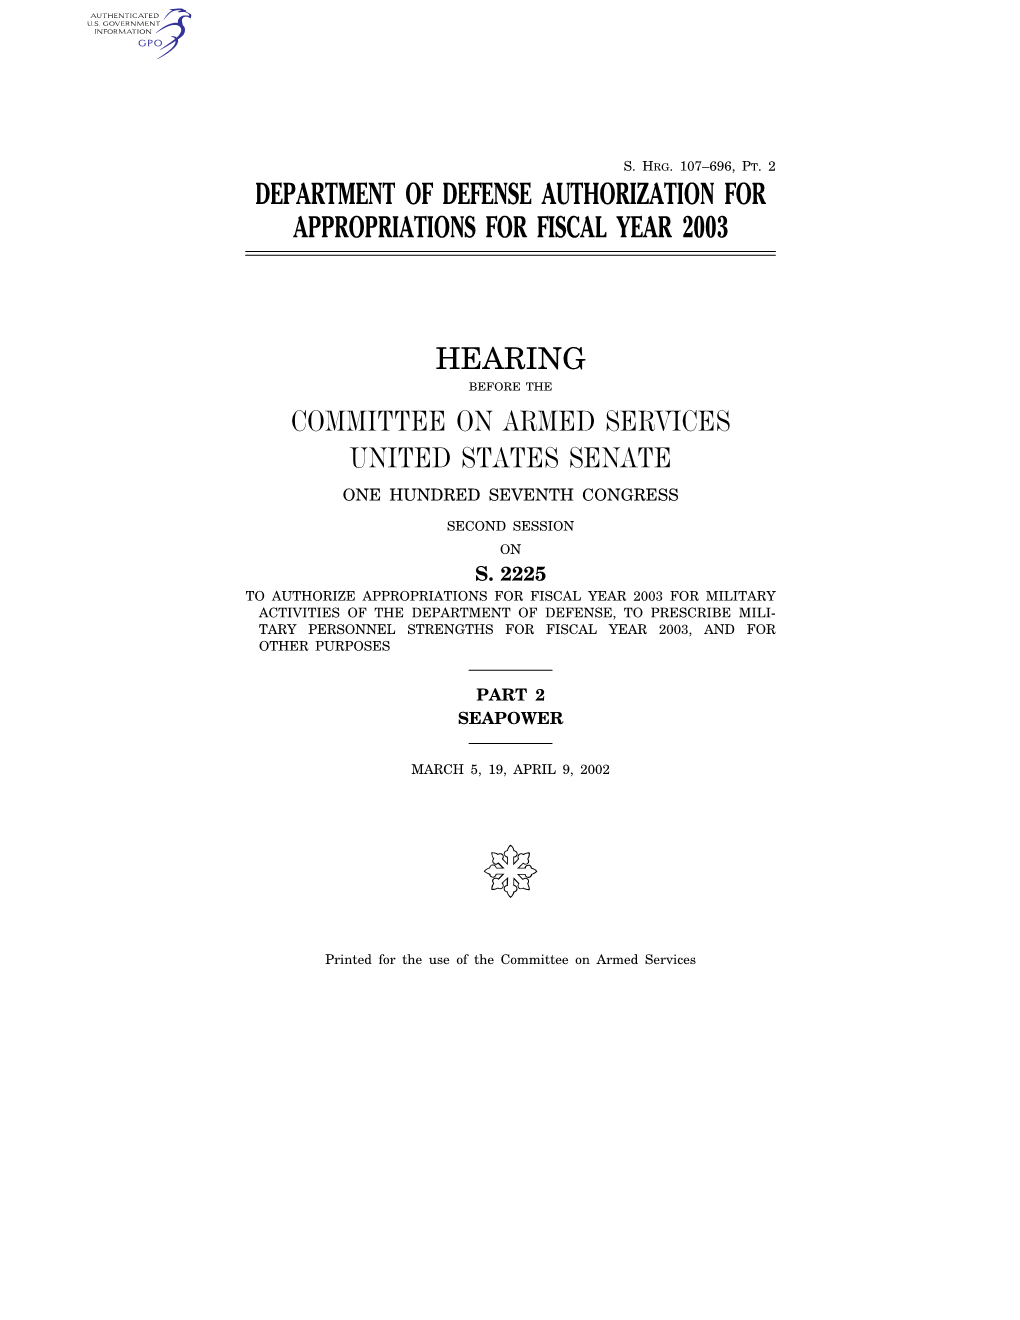 Department of Defense Authorization for Appropriations for Fiscal Year 2003